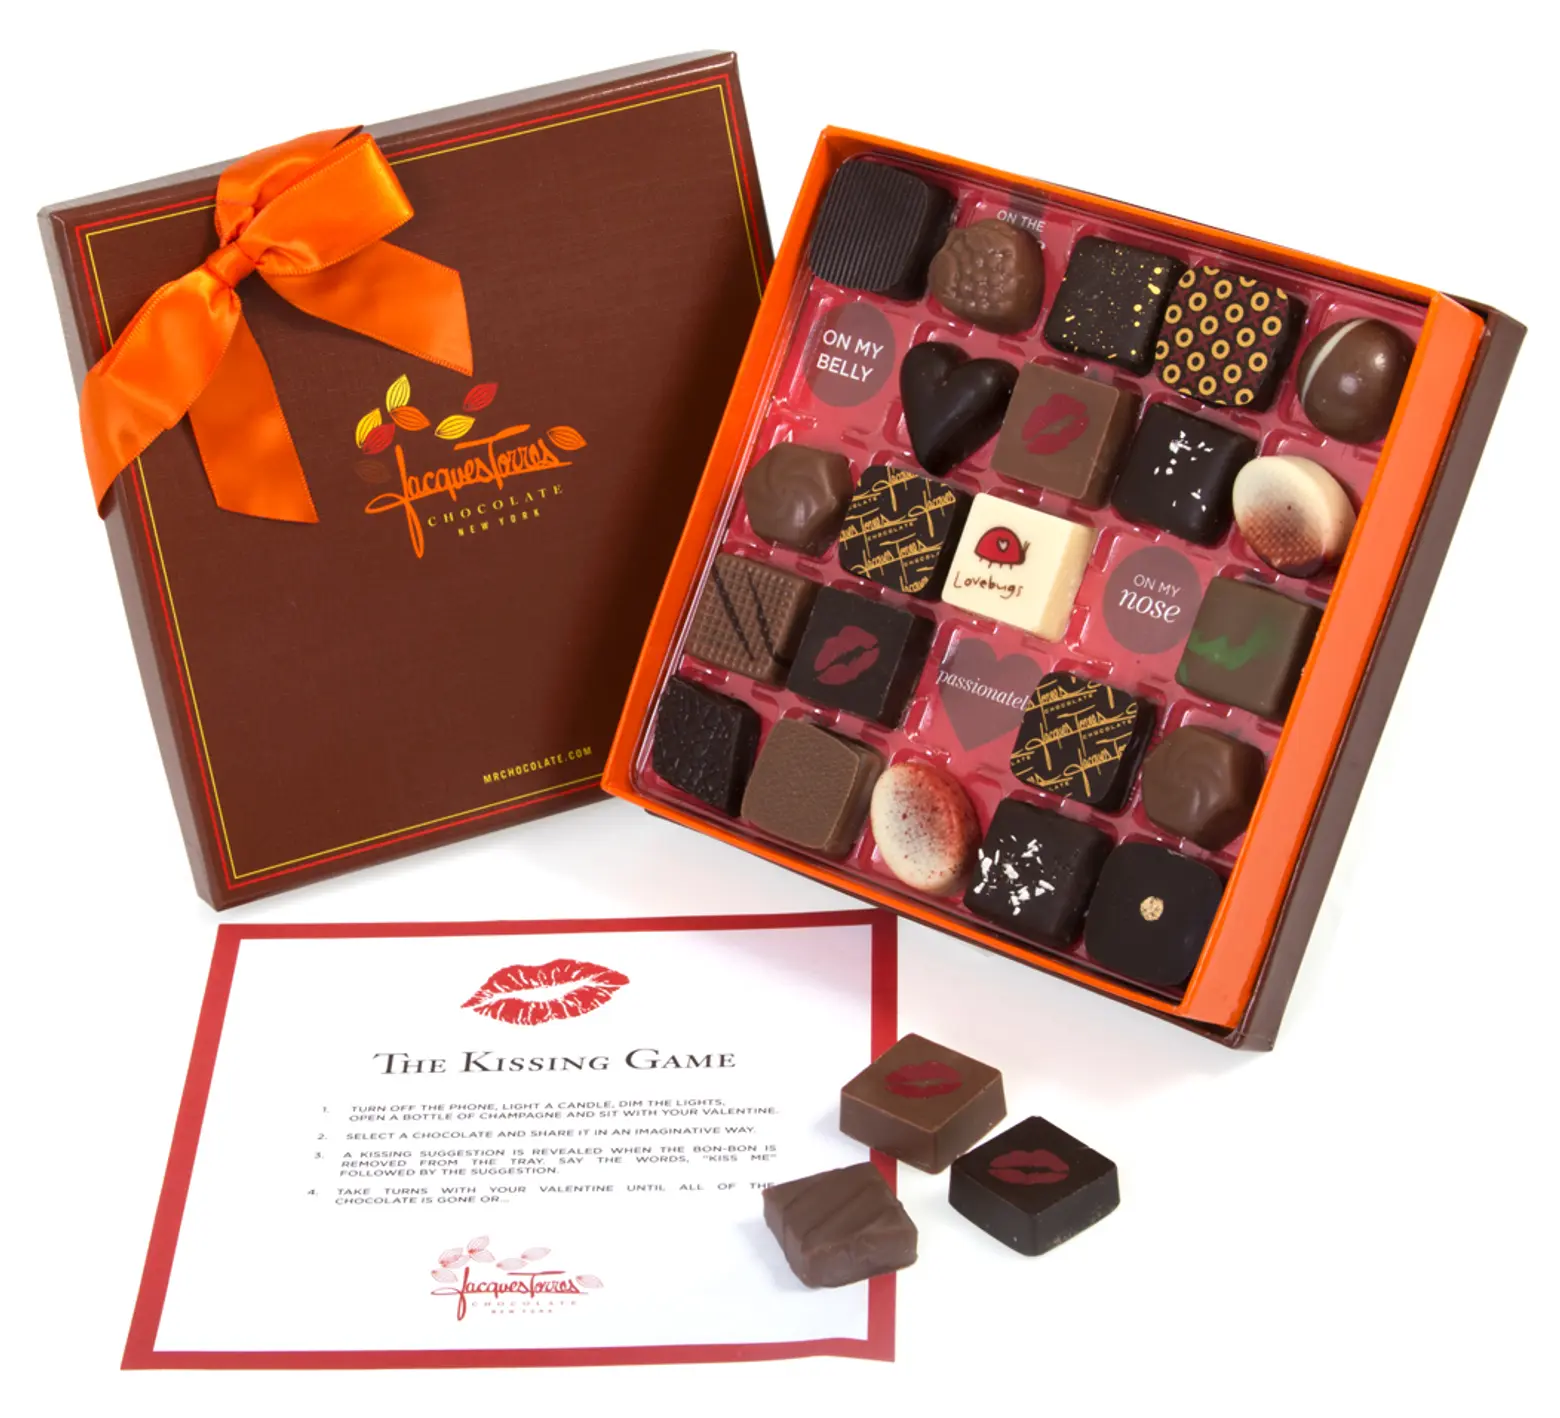 Jacques Torres Chocolate, chocolate games, The Kissing Game